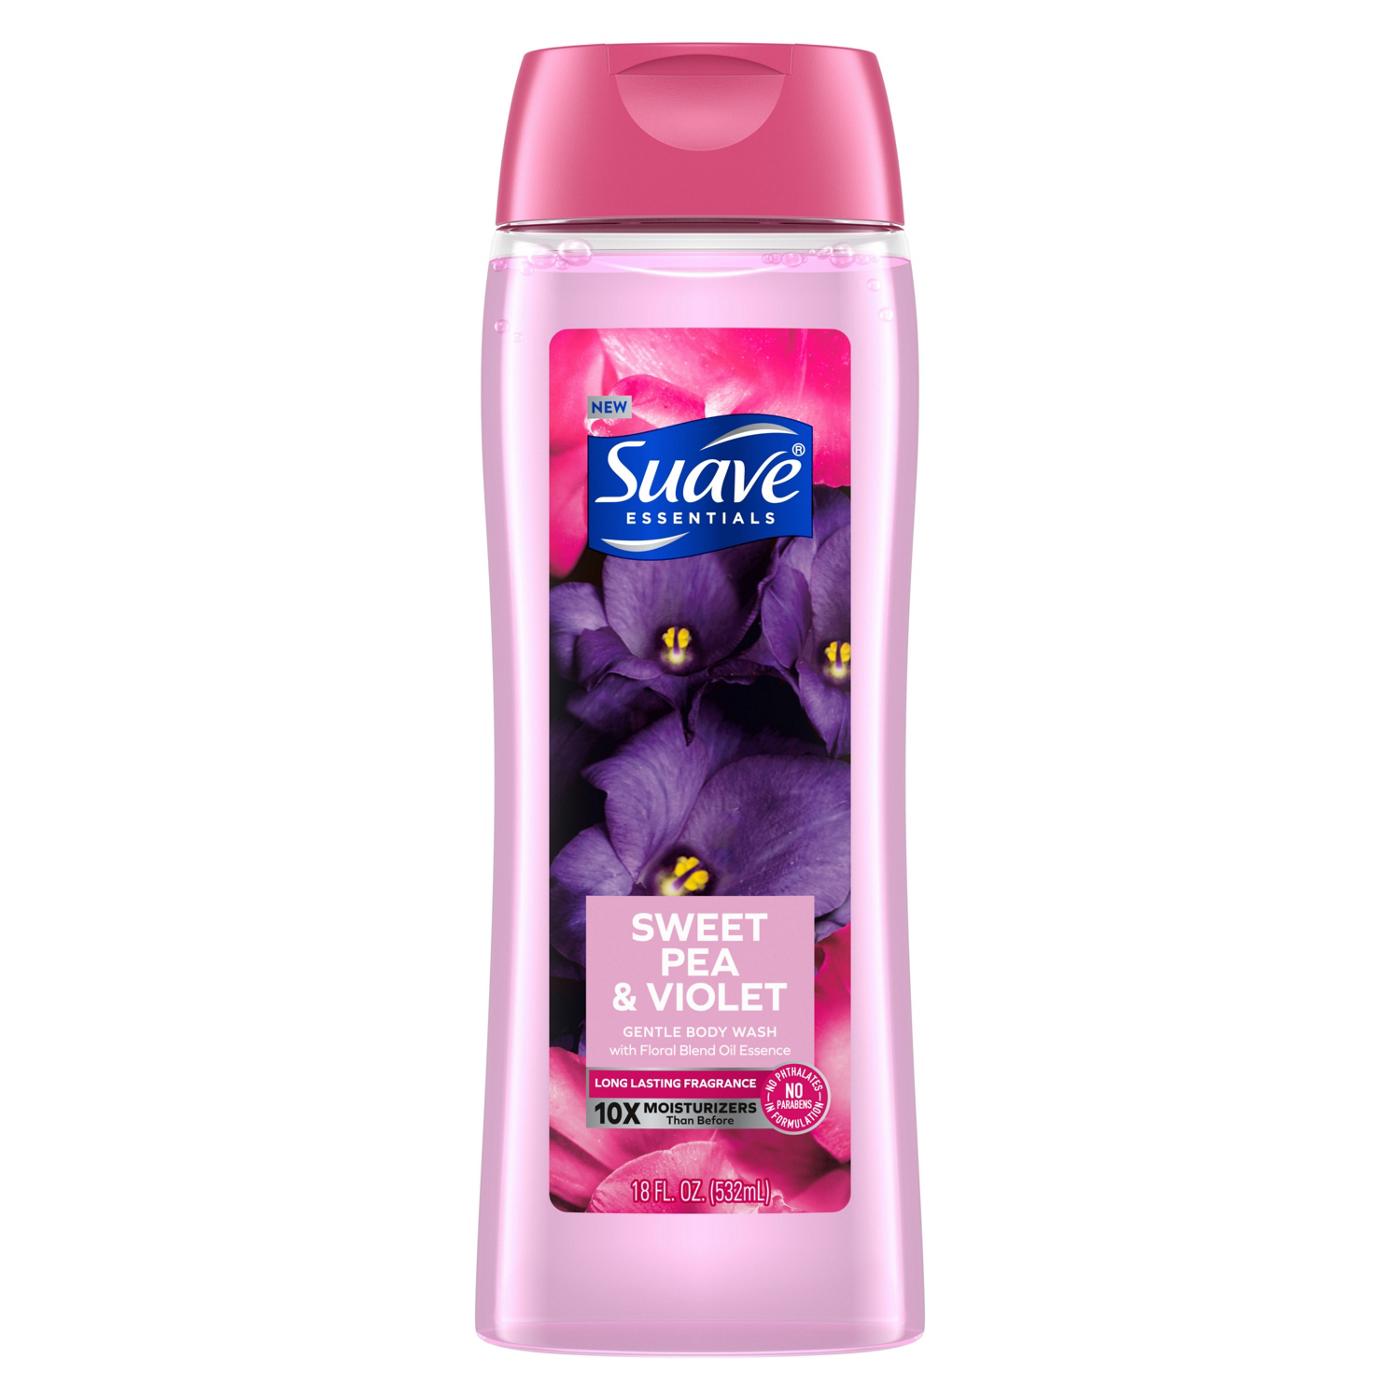 Suave Essentials Gentle Body Wash - Sweet Pea & Violet; image 1 of 3